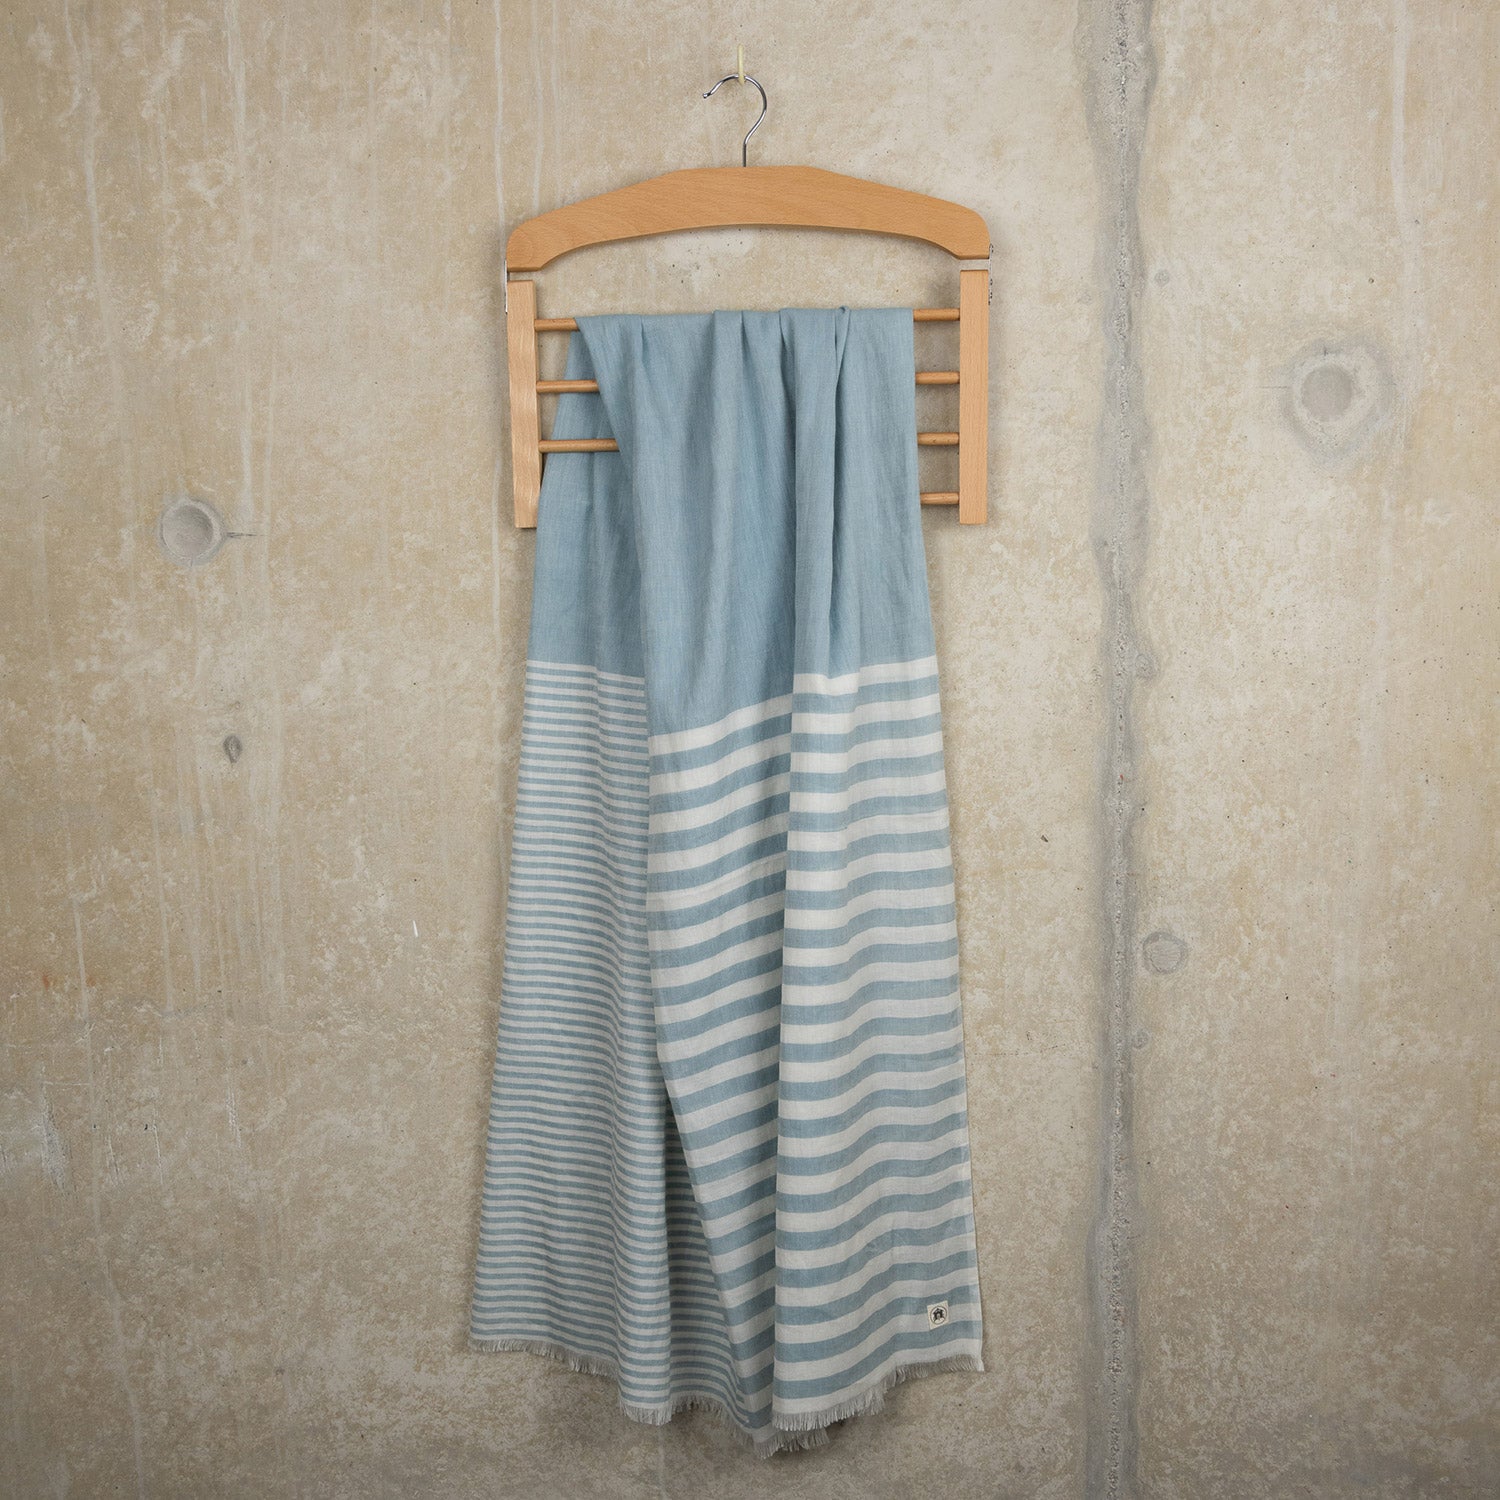 A photo of the sea blue stripe scarf on a hanger with a rustic concrete background. The scarf has blue and white stripes.